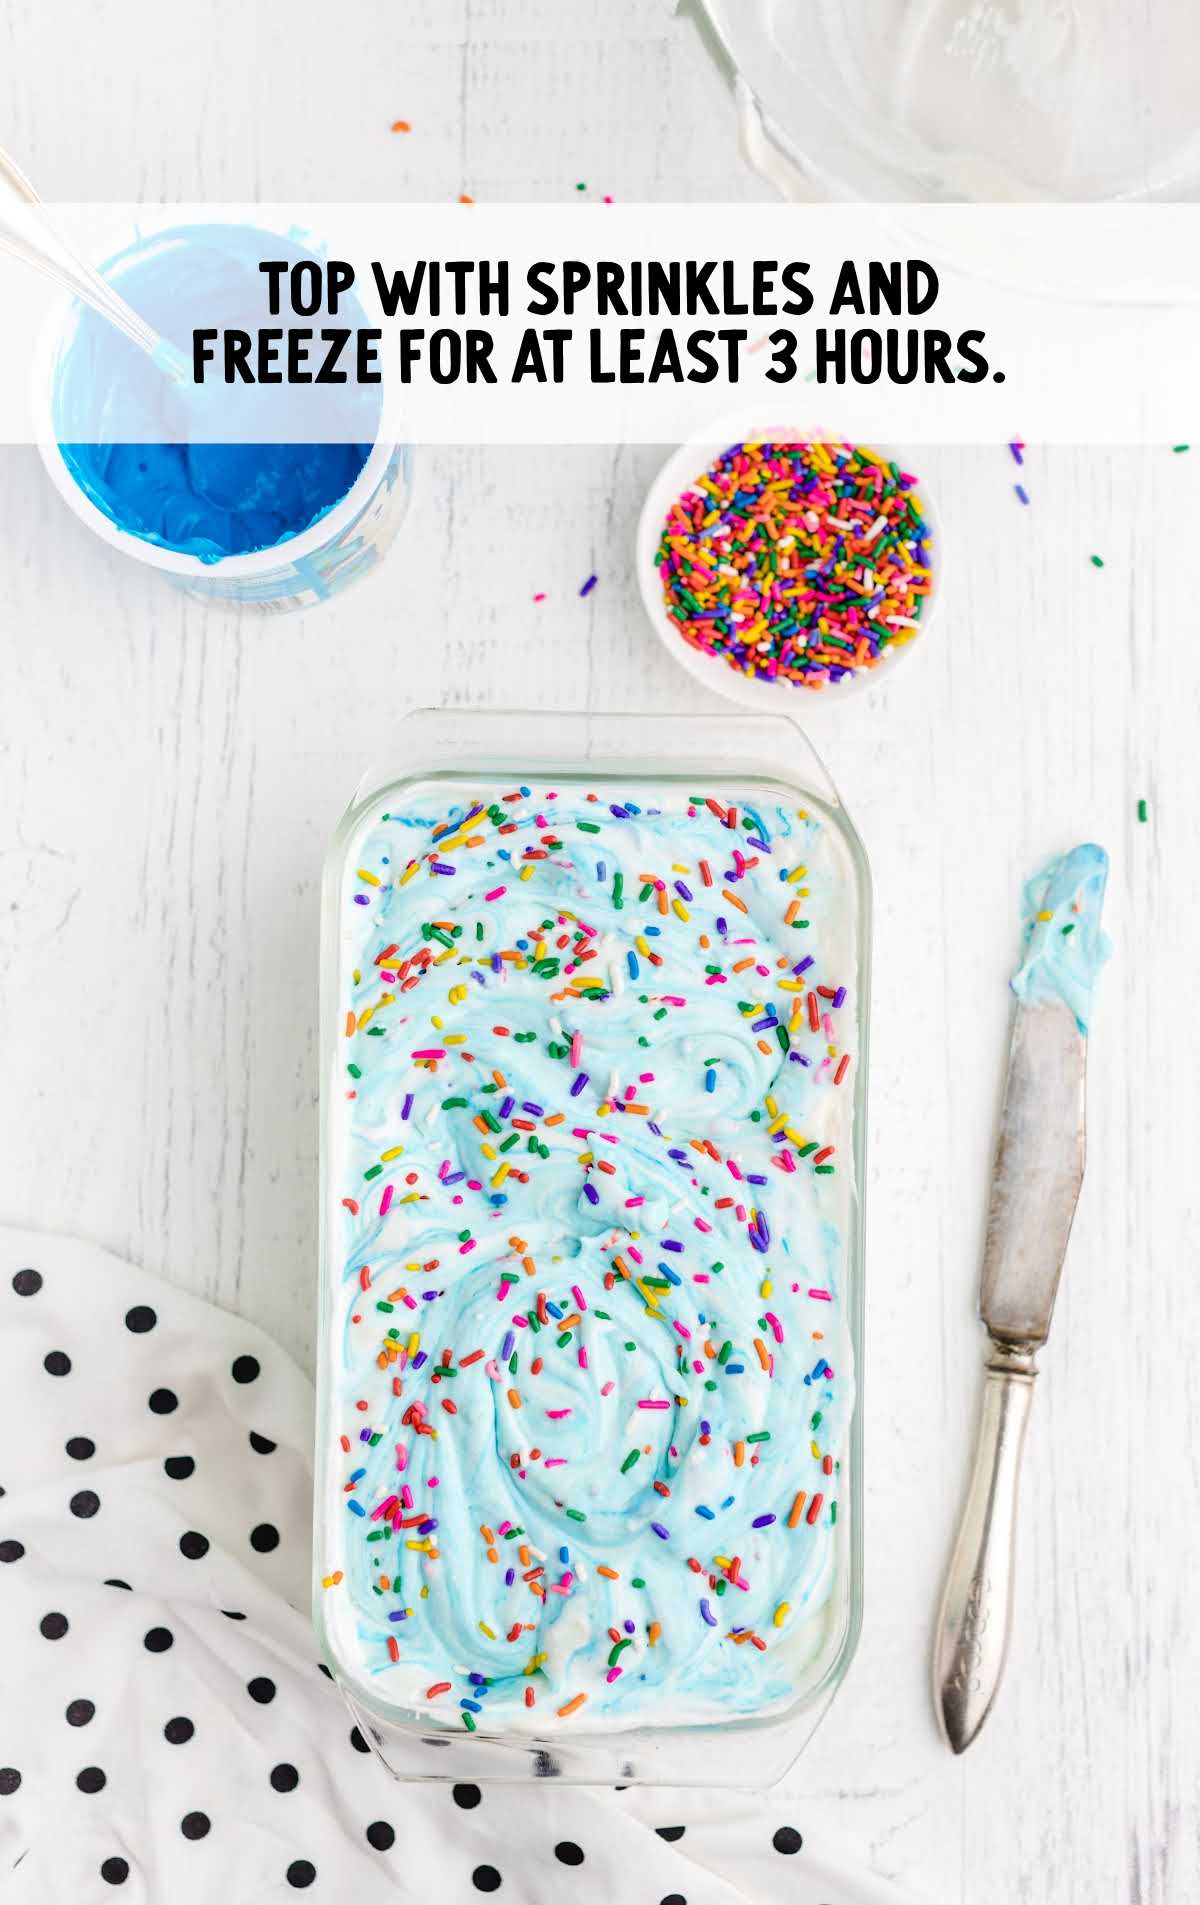 cake topped with sprinkles in a baking dish